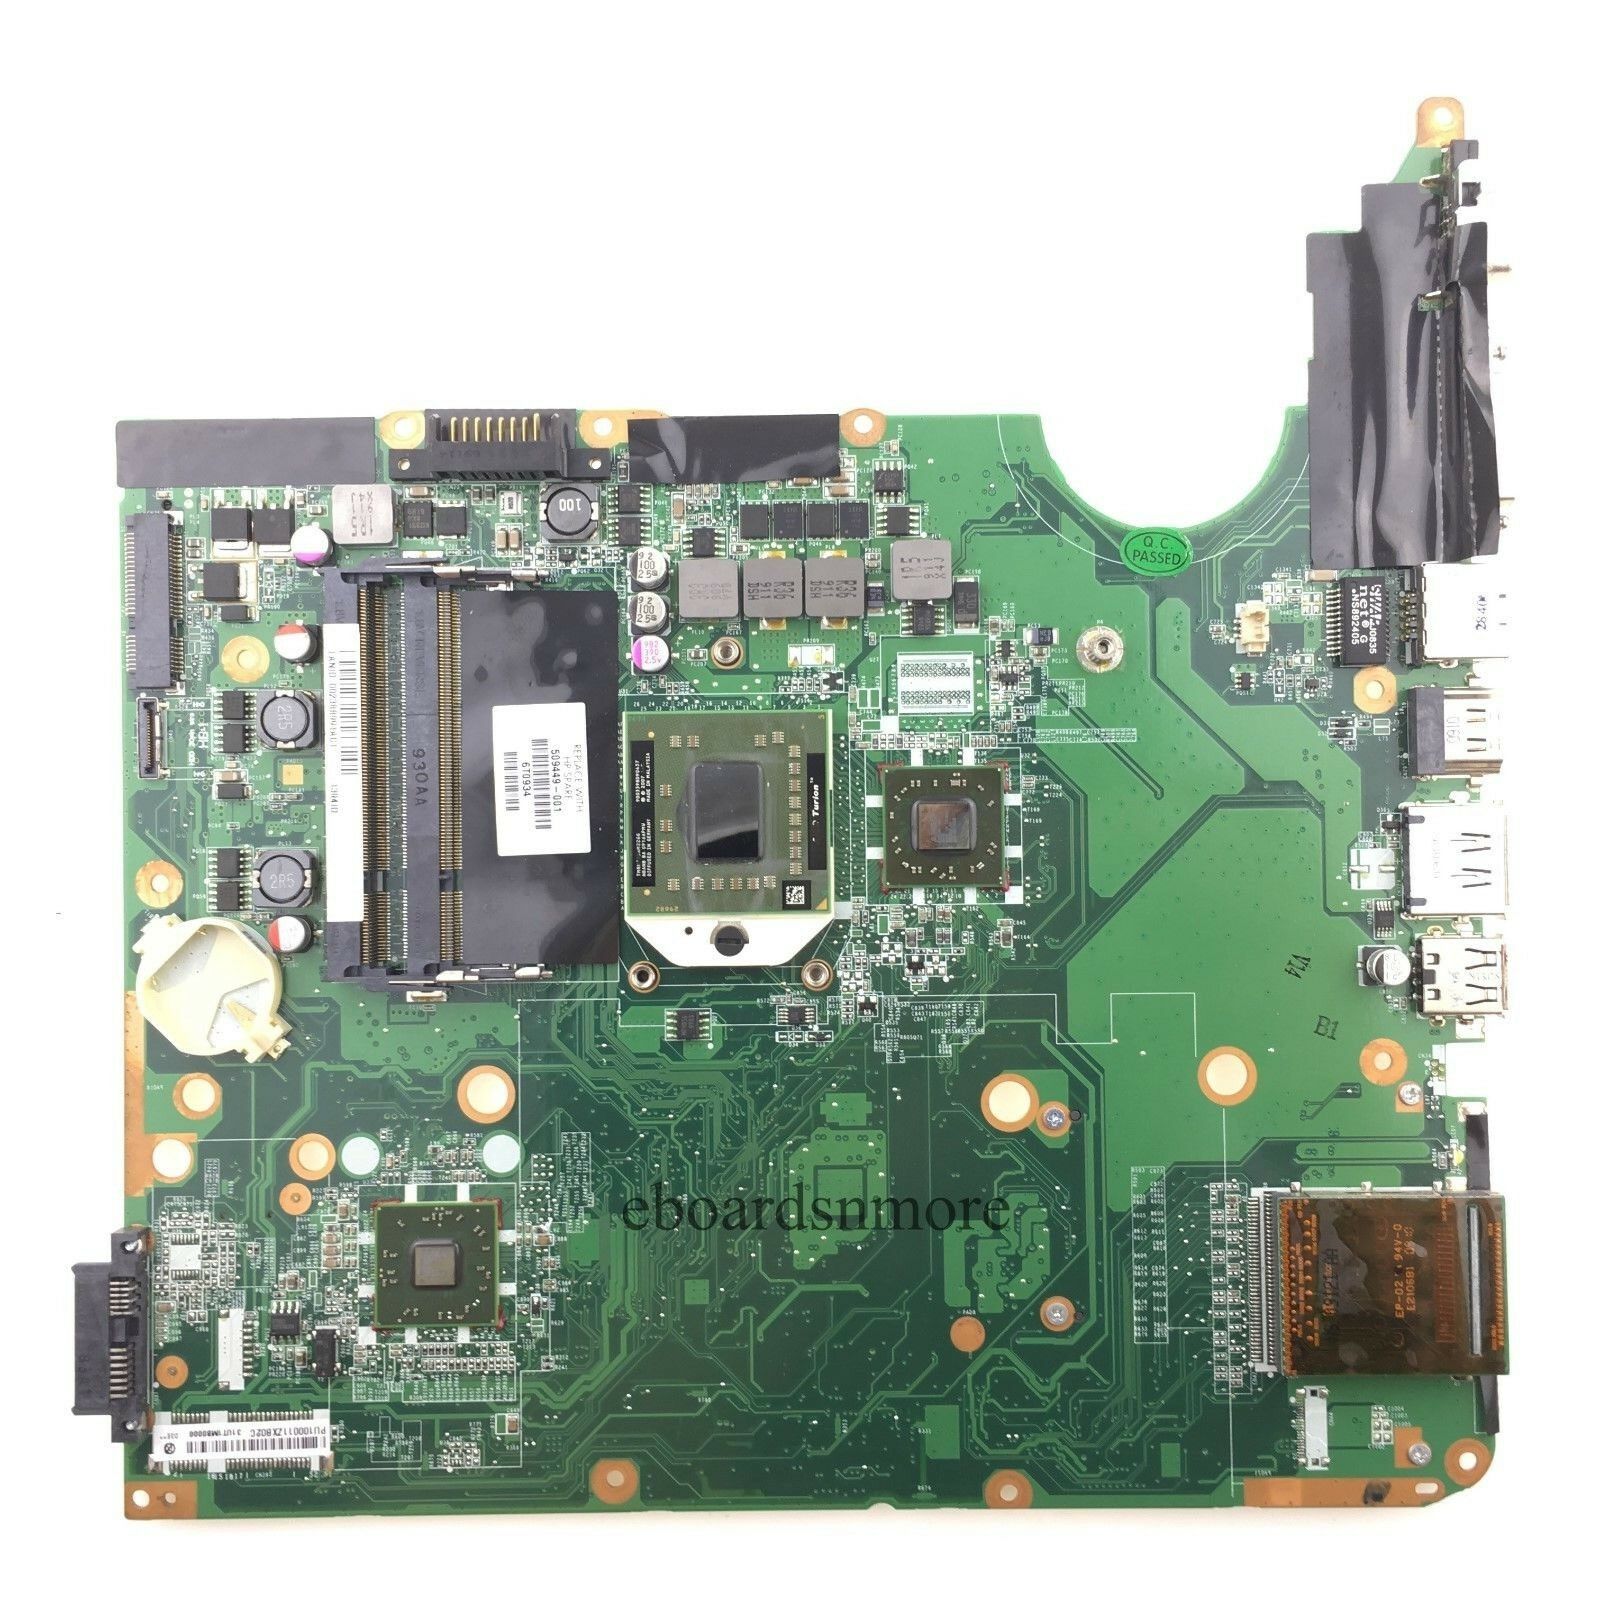 509449-001 AMD S1 MOTHERBOARD for HP PAVILION DV6-1100 Series Laptops, HD3200, A Compatible CPU Brand: AMD - Click Image to Close